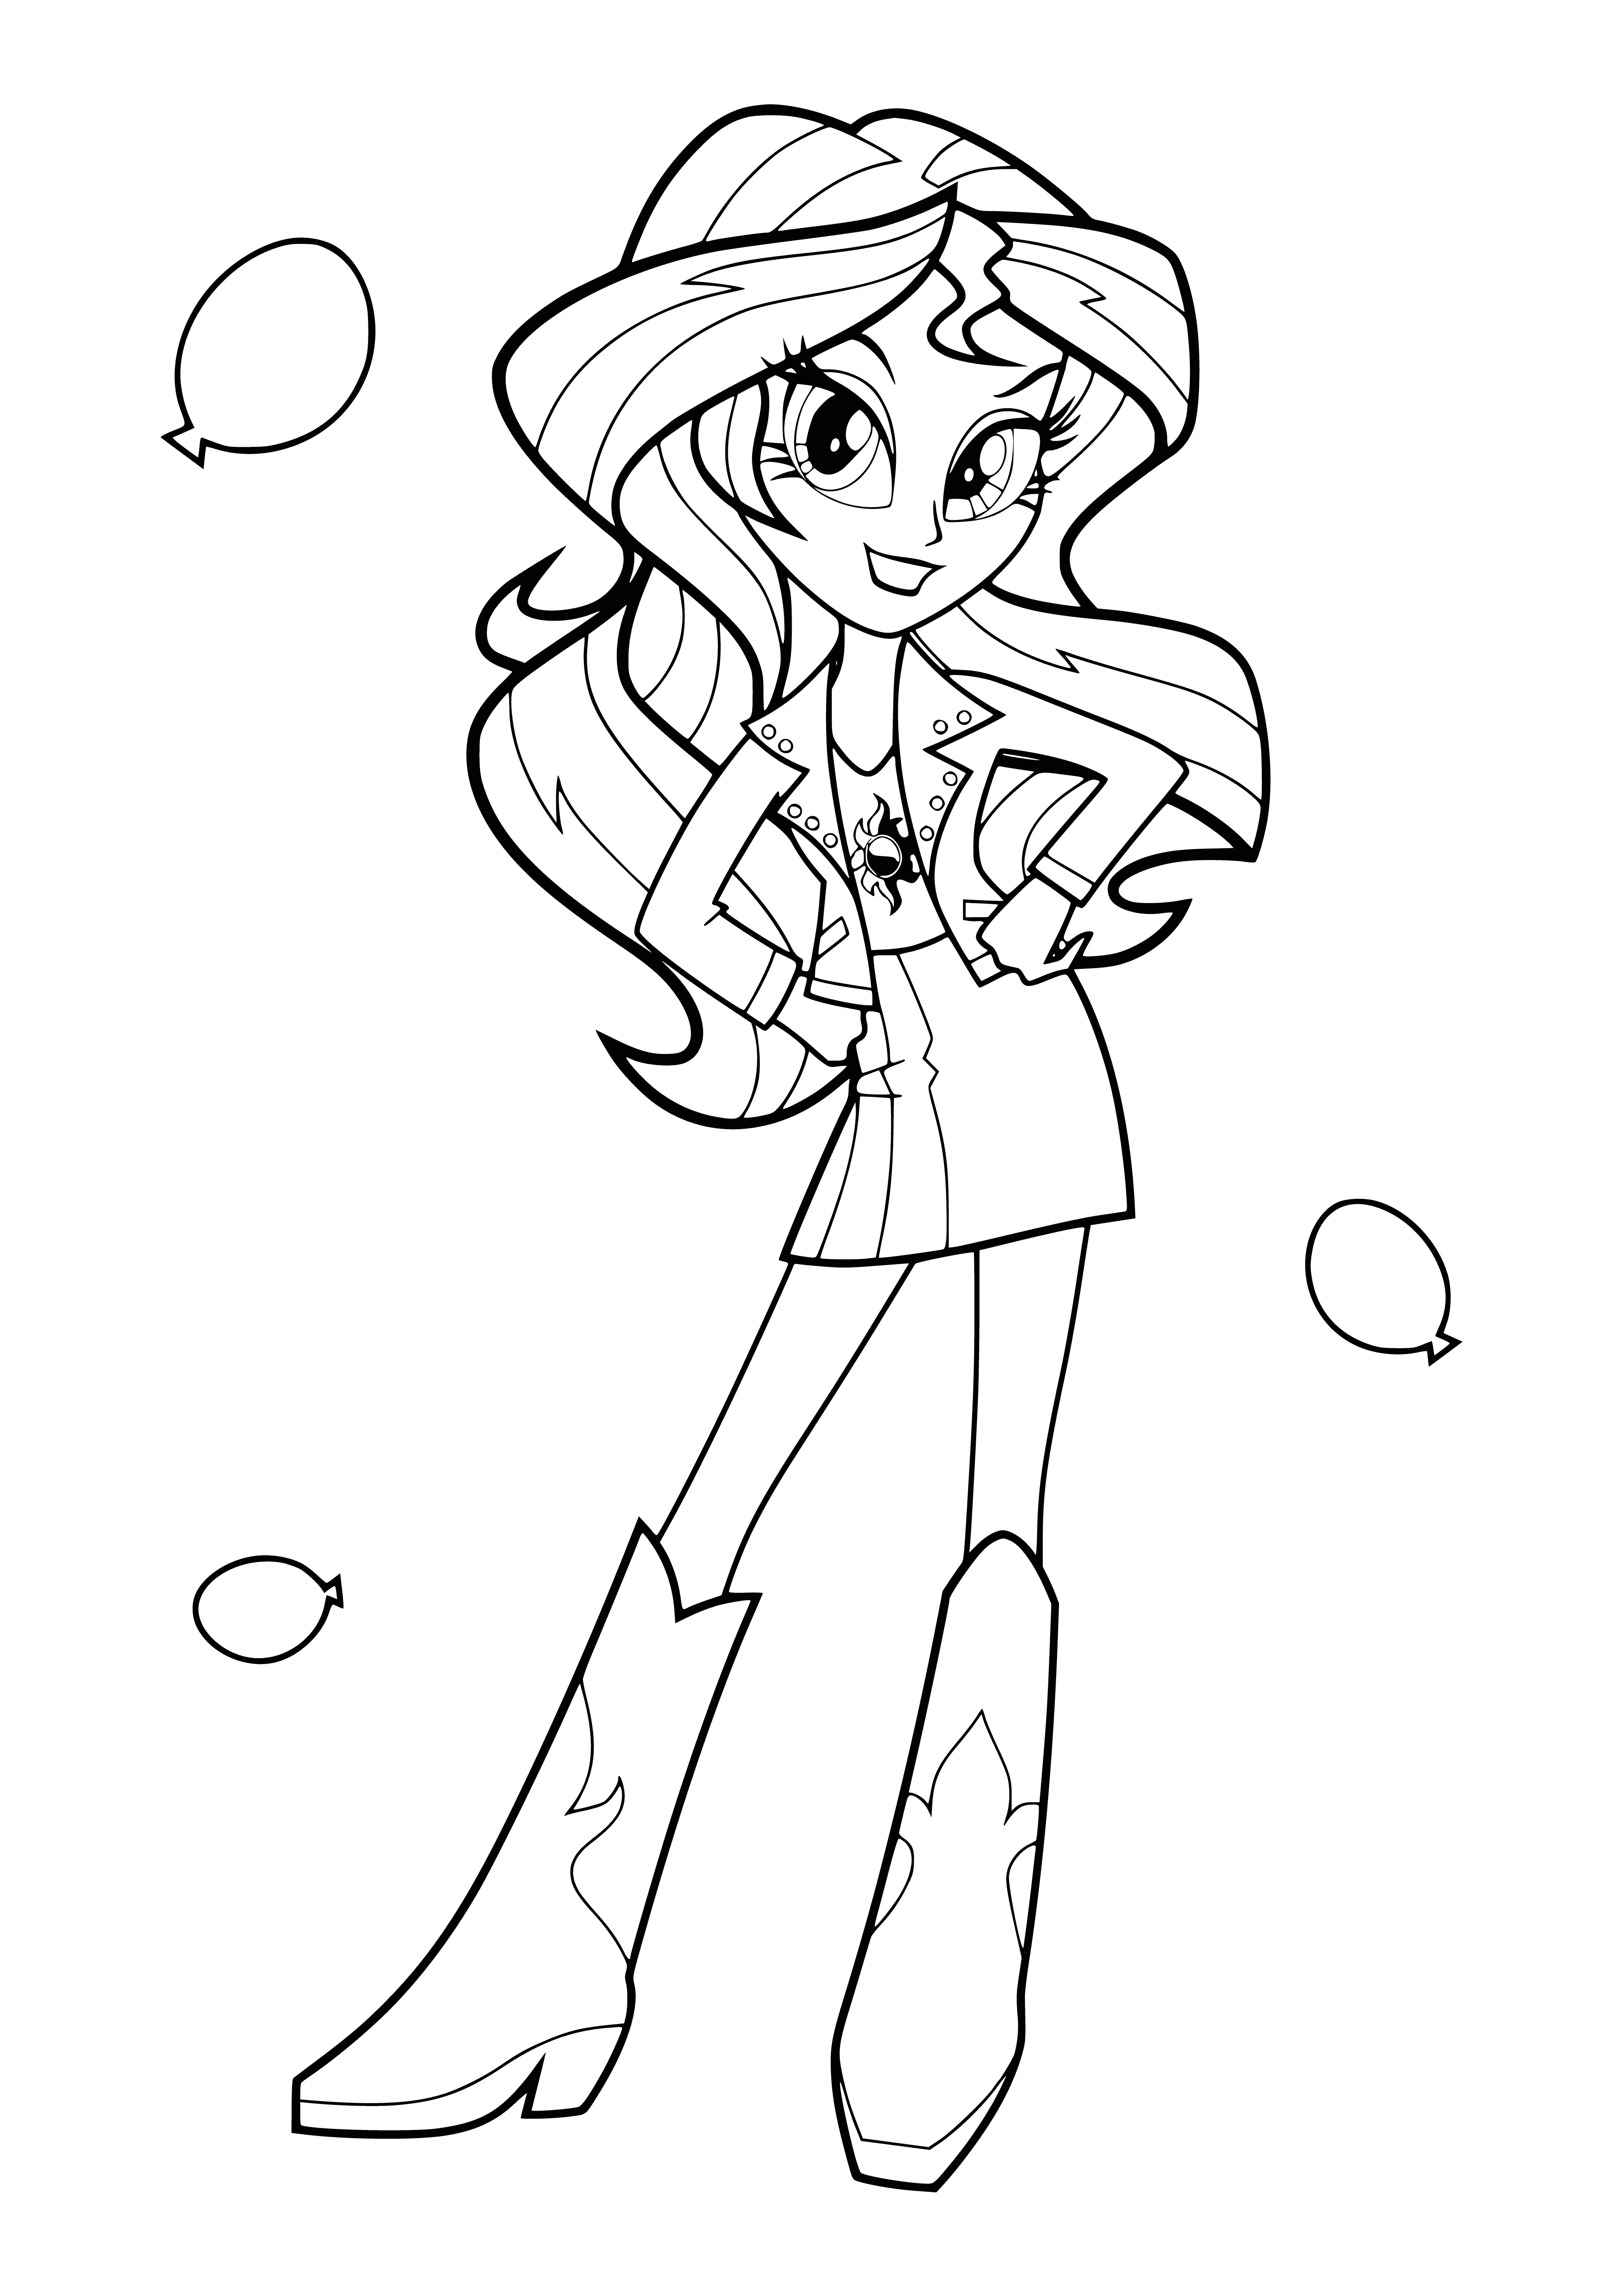 Sunset Shimmer wears a sleeveless, purple and pink dress, white laces, and a small tiara to complete her look. She stares with a serious expression.